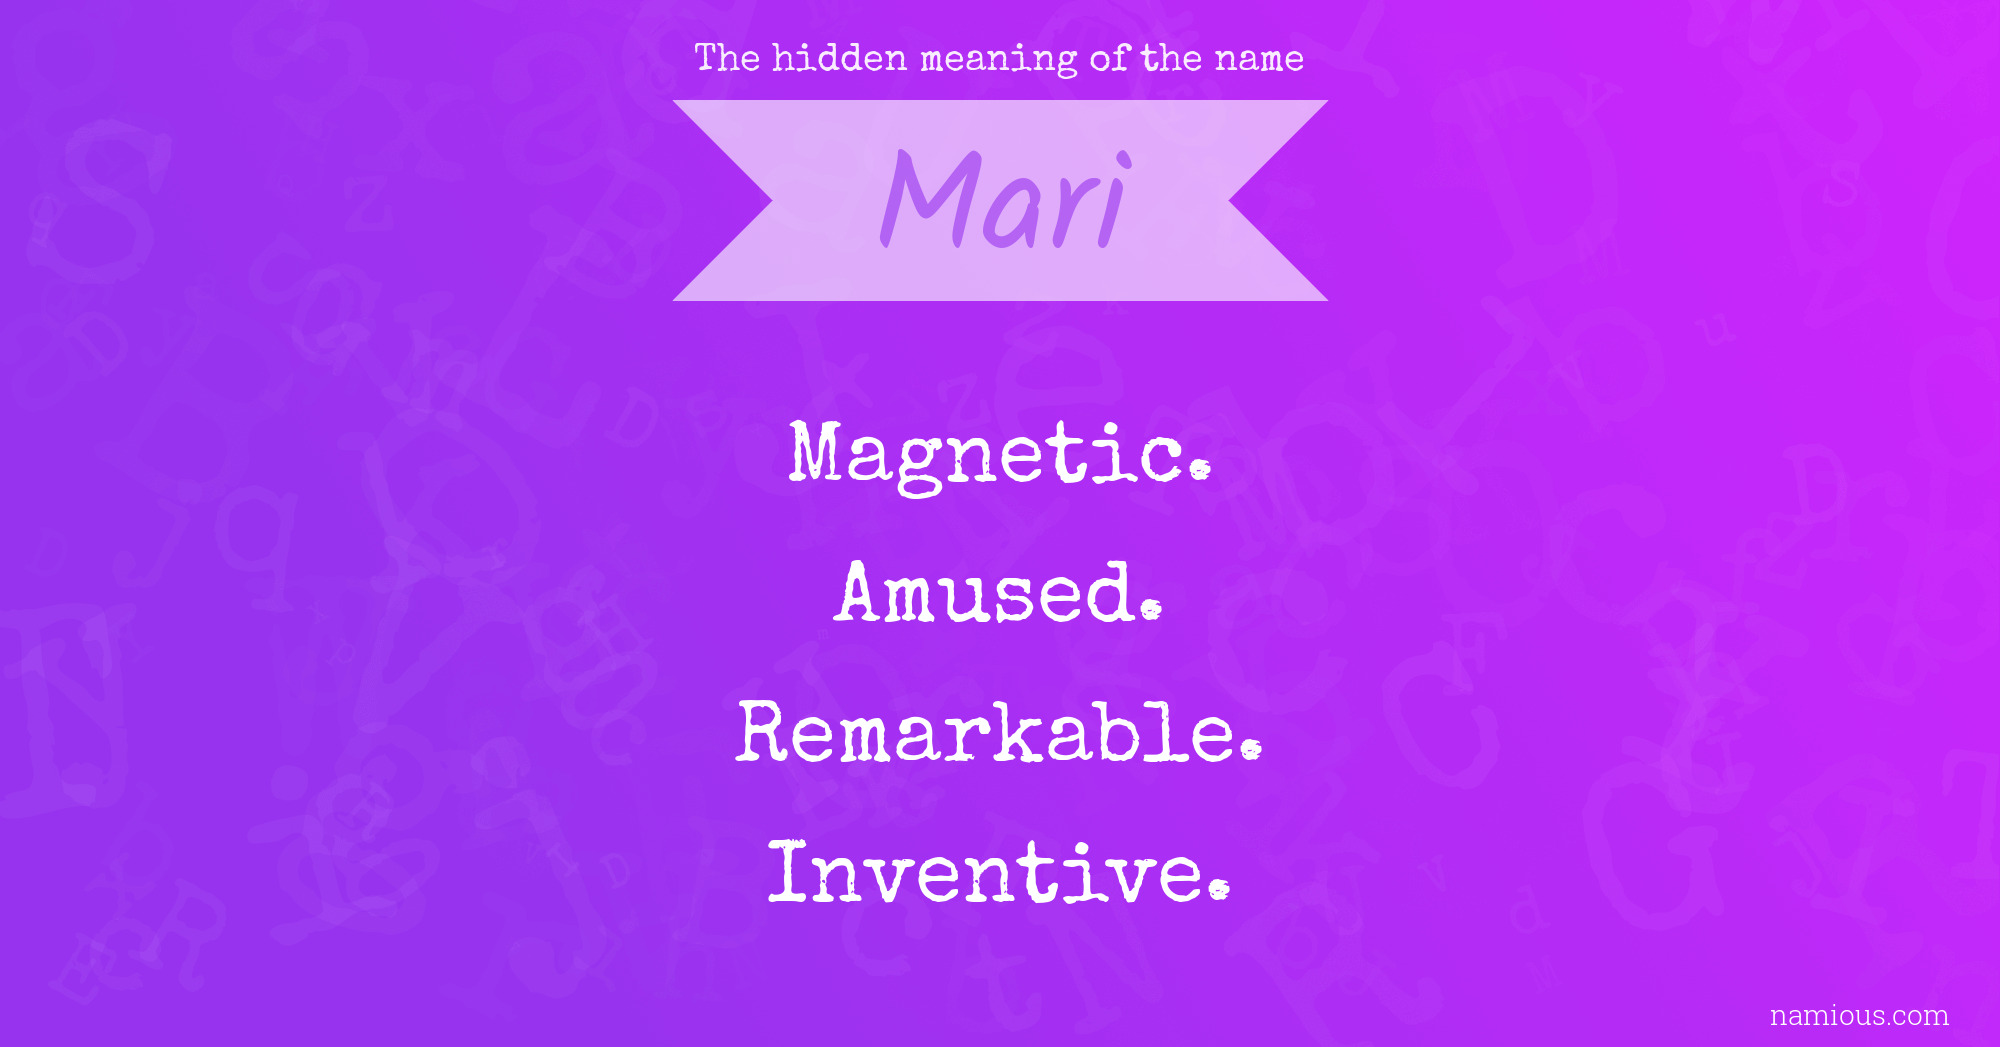 The hidden meaning of the name Mari